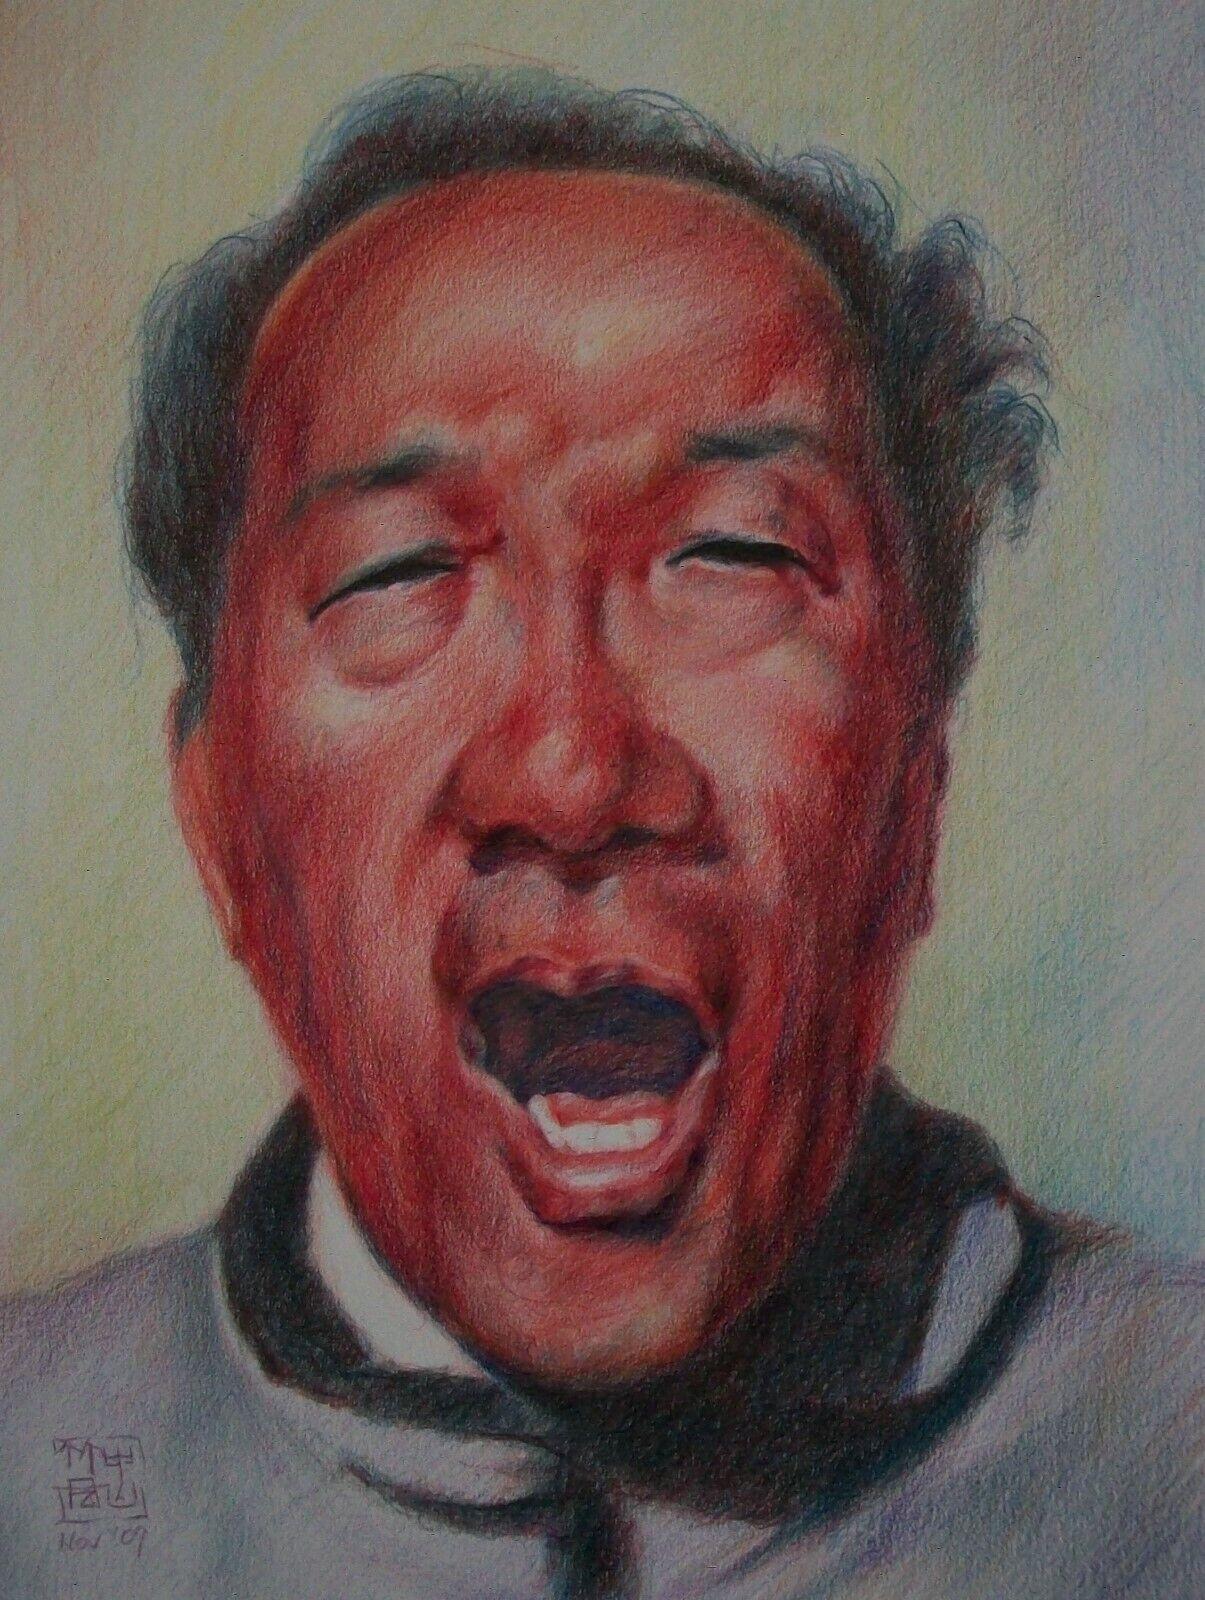 Contemporary Chinese avant-garde colored pencil portrait drawing on paper - hand drawn - appears to be the likeness of Mao (?) with an open mouth and tousled hair - signed with drawn seal and dated lower left (unidentified/unknown artist) - China -